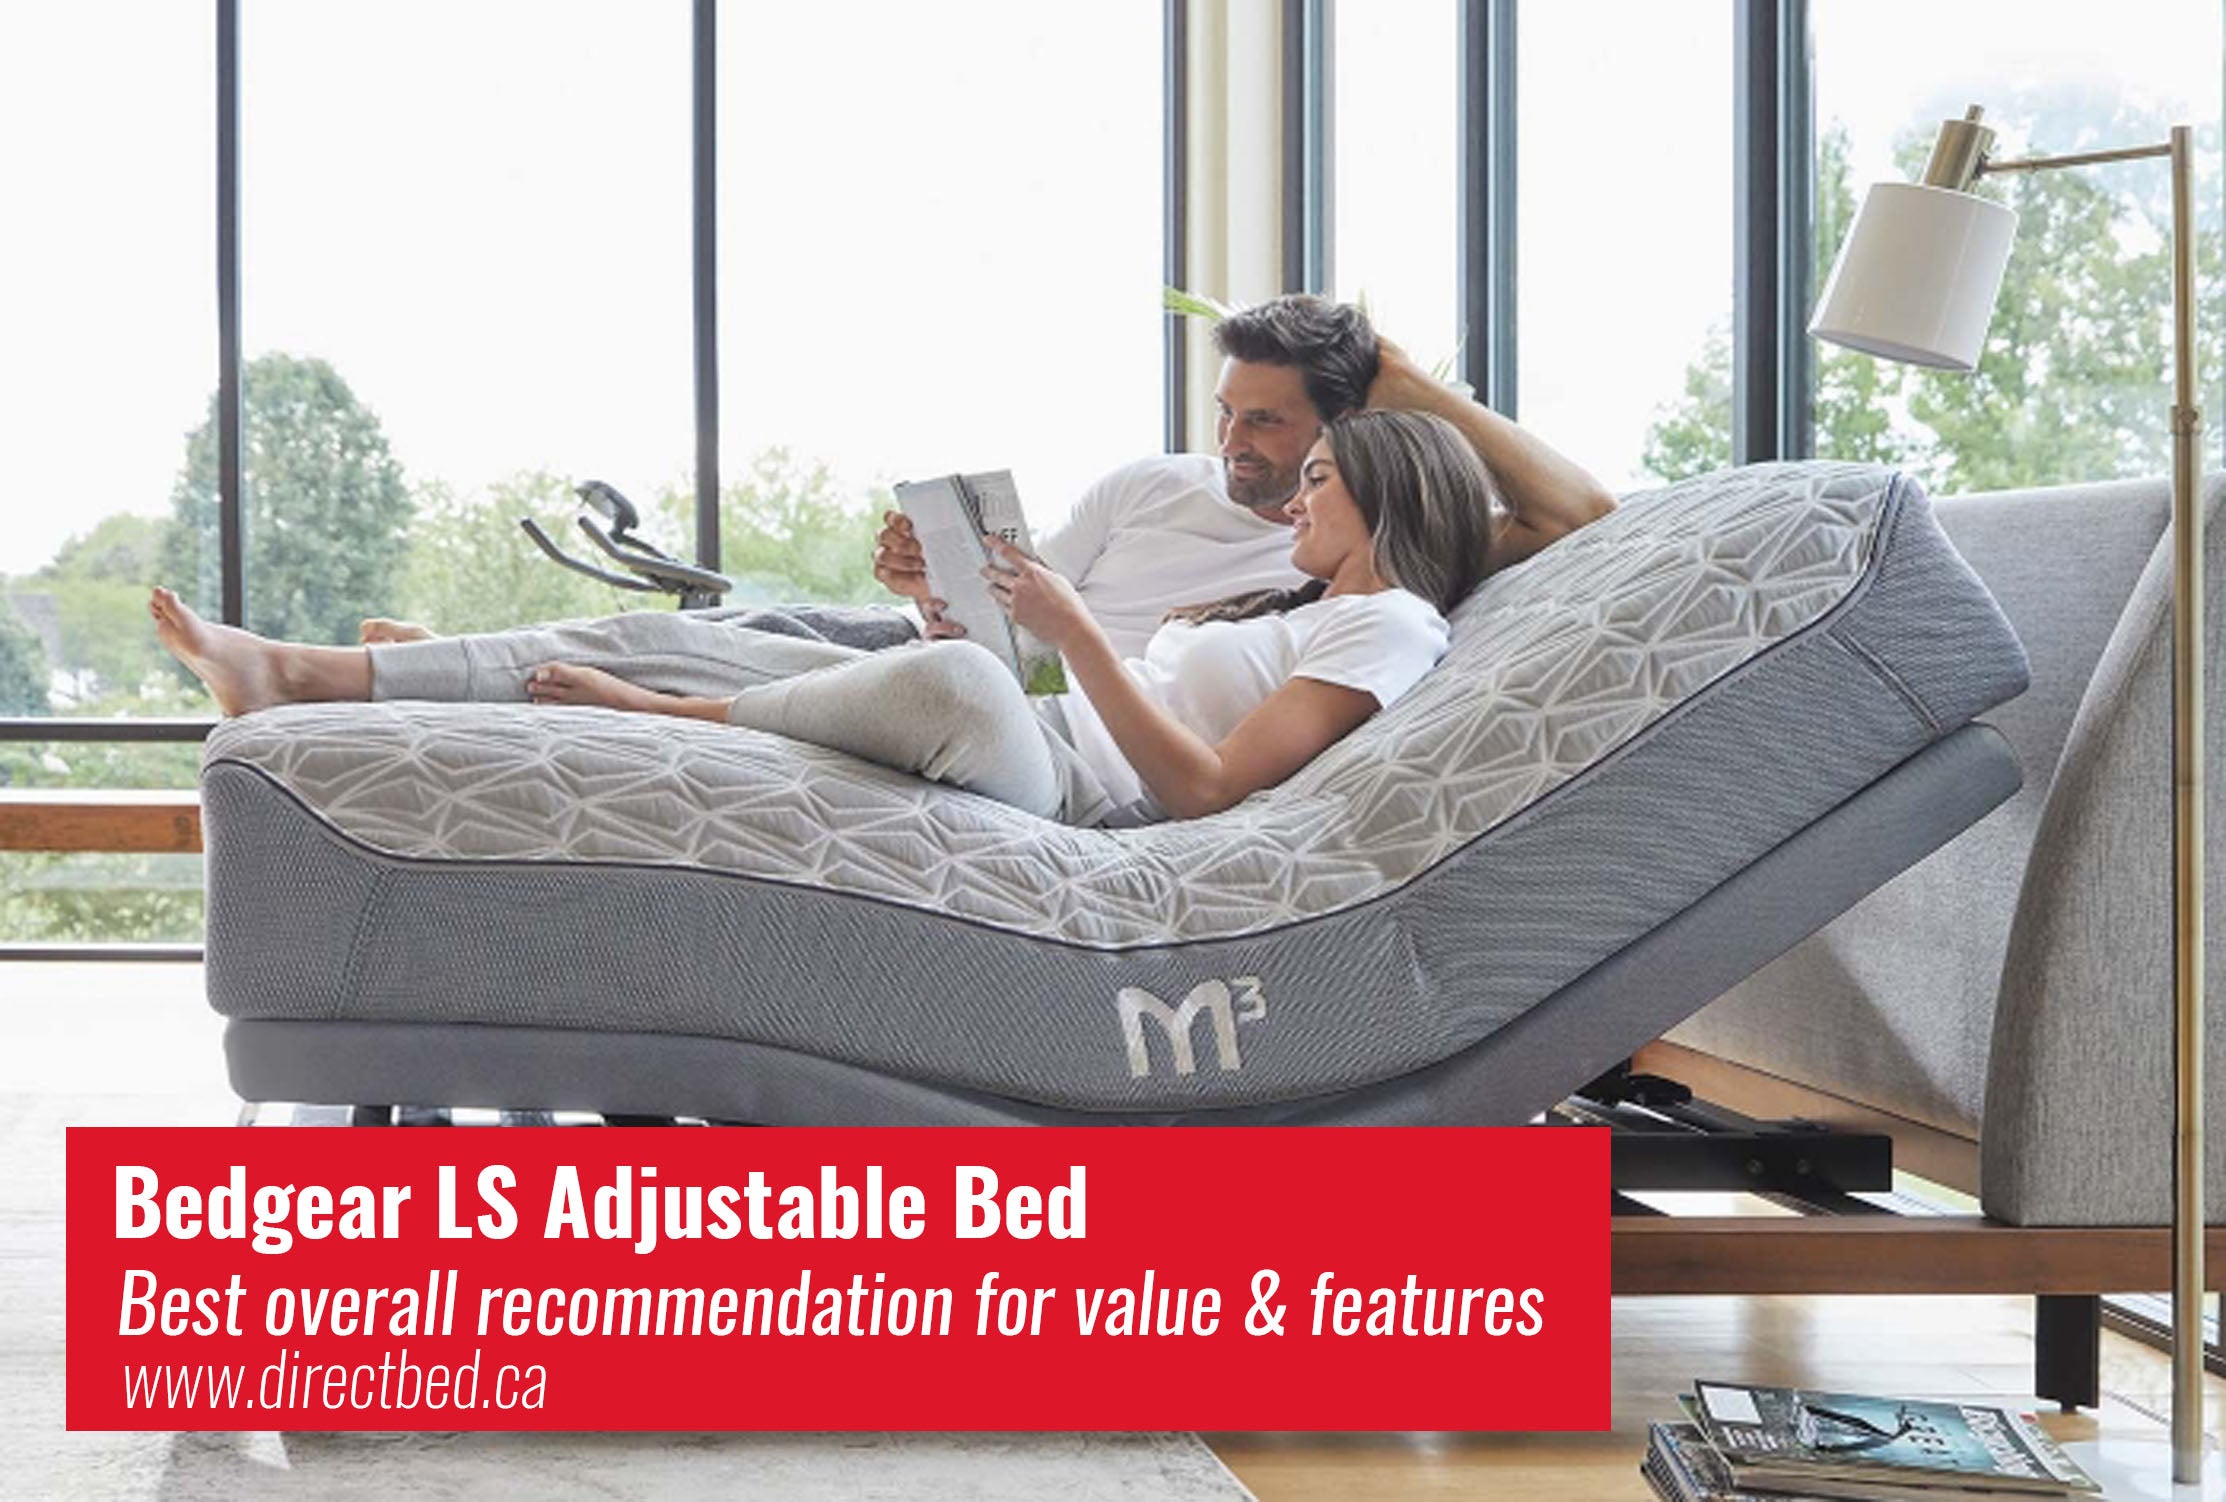 Bedgear Electric Adjustable Bed LS Best overall recommendation